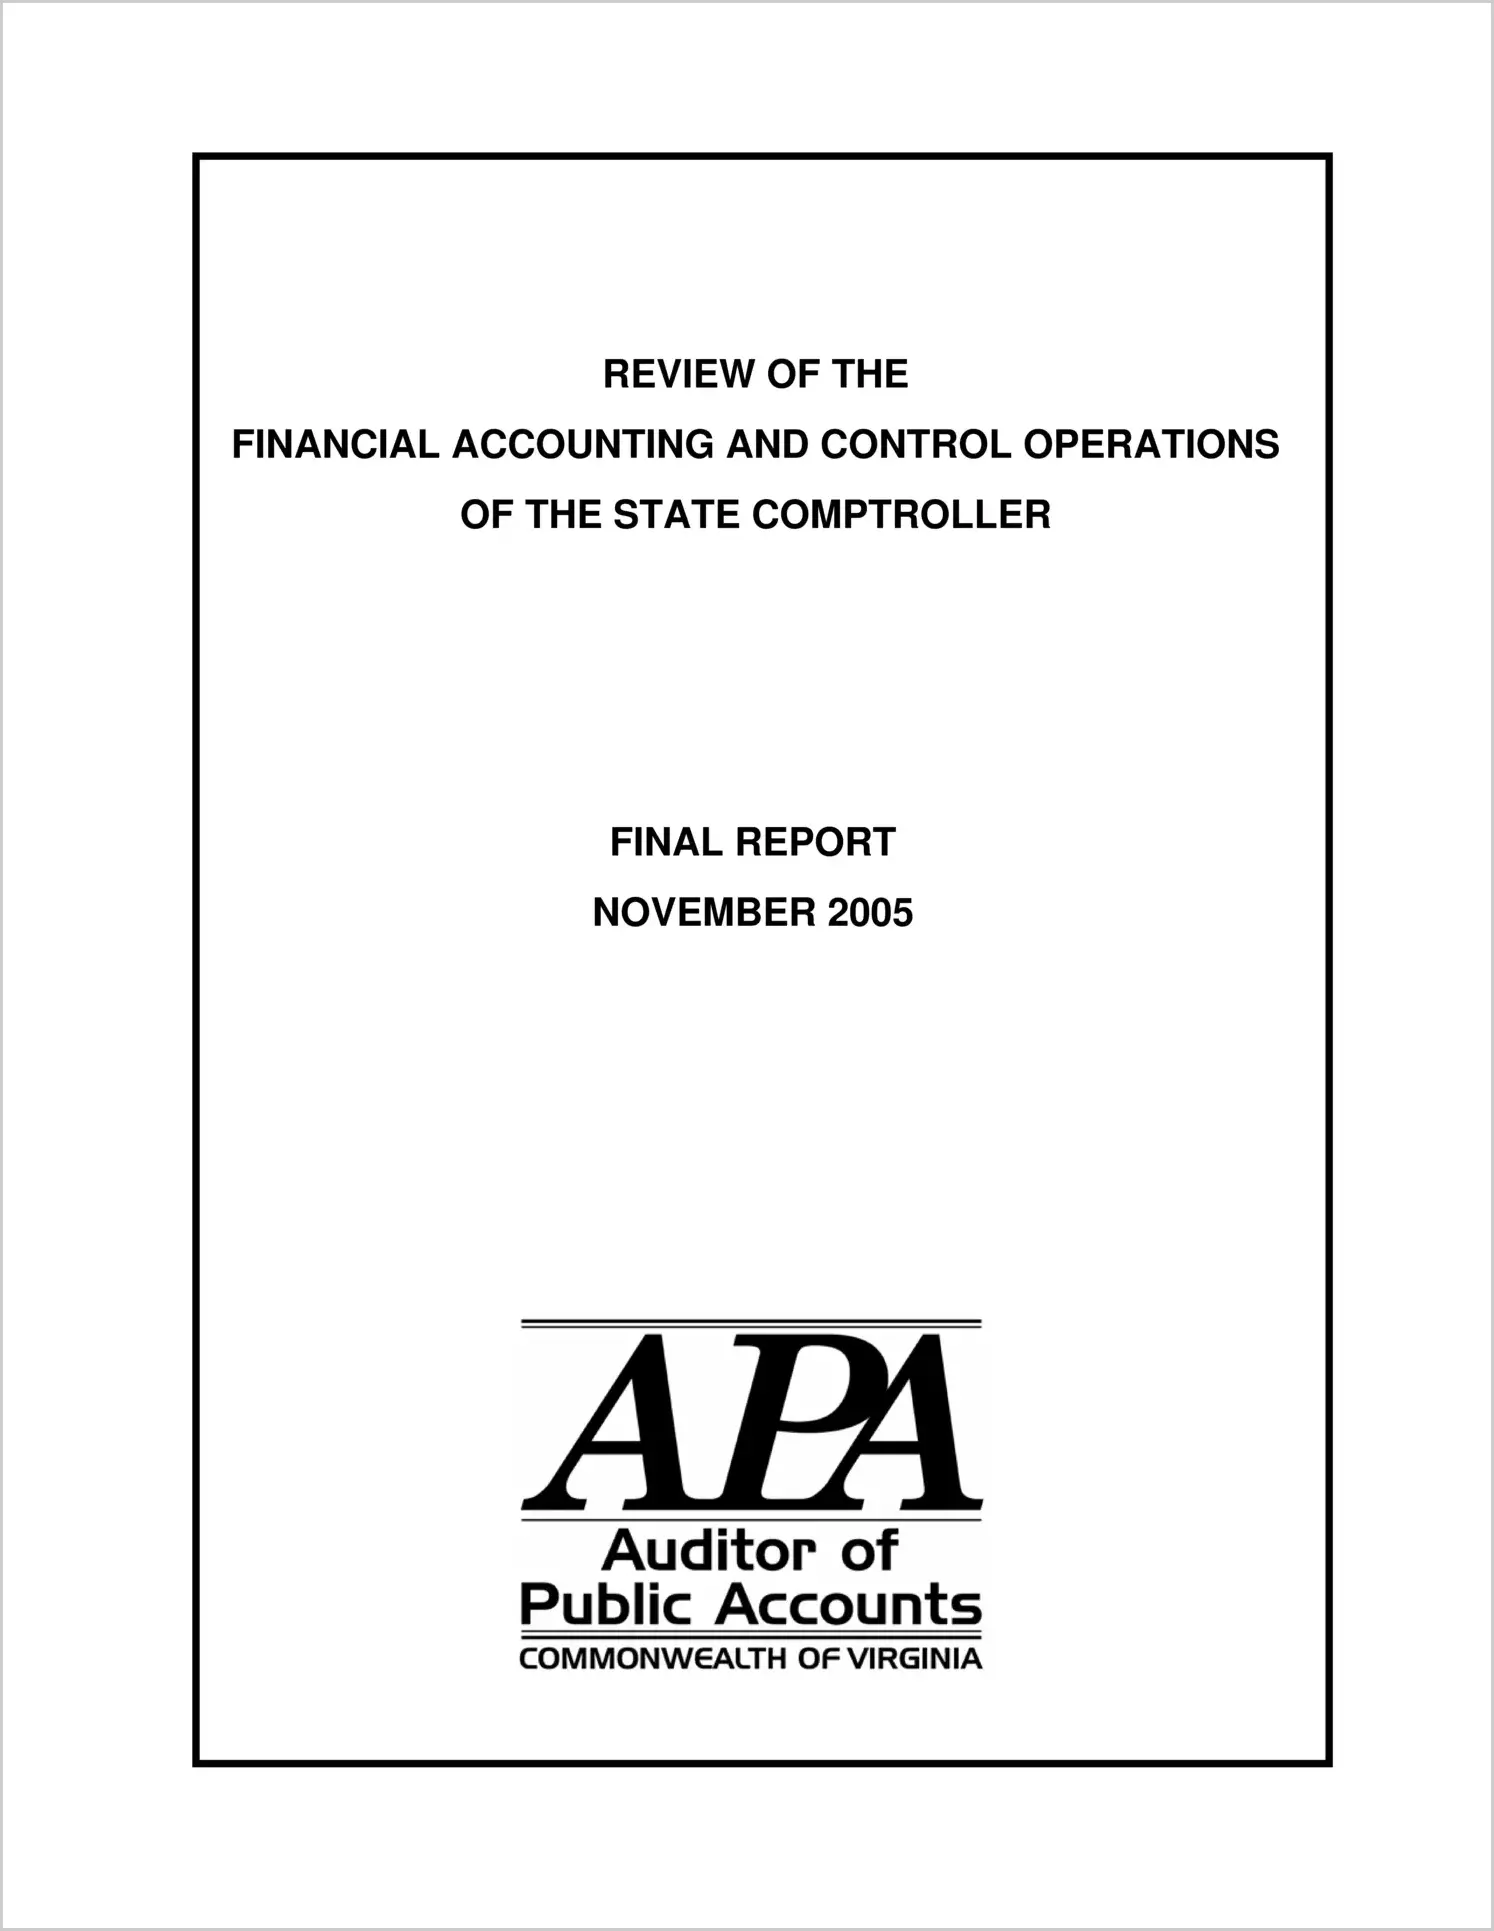 Review Of The Financial Accounting and Control Operations of The State Comptroller Final Report (Report Date: 11/2005)